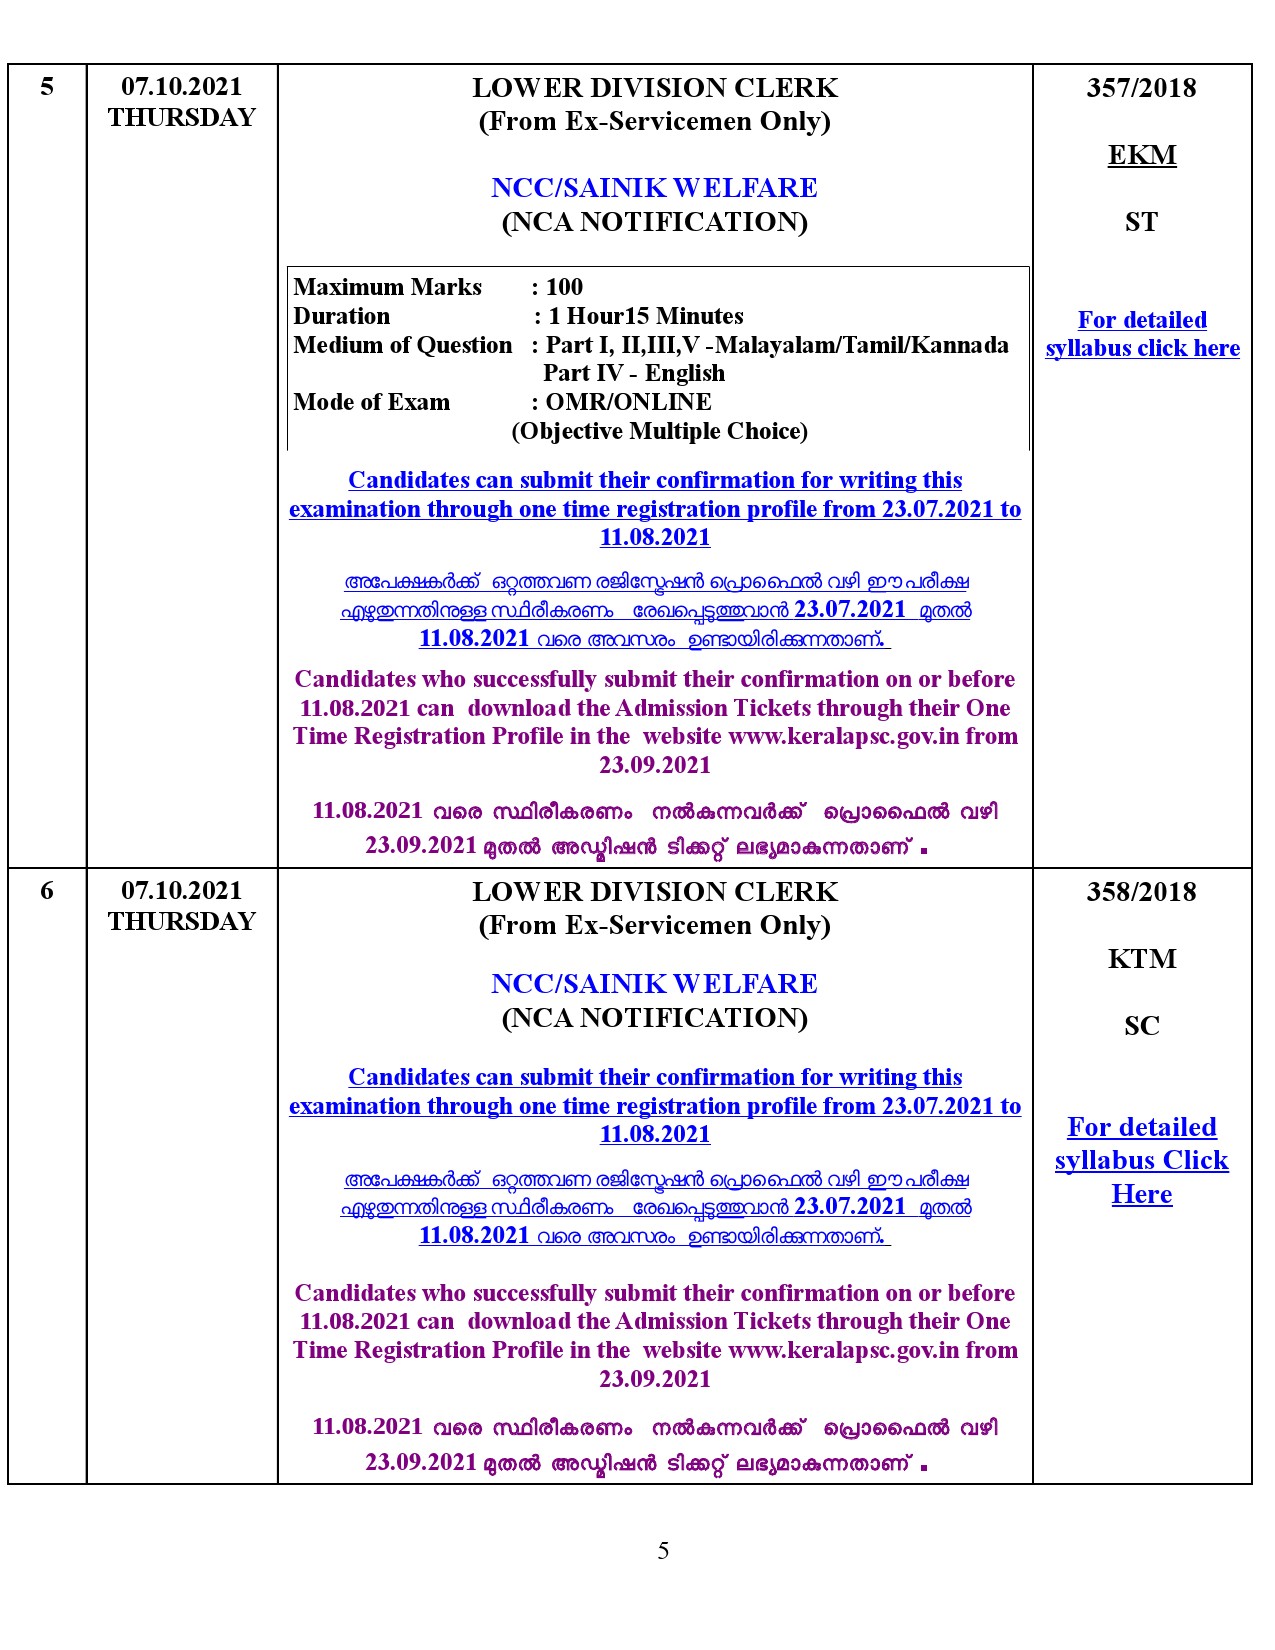 KPSC Examination Programme For The Month Of October 2021 - Notification Image 5